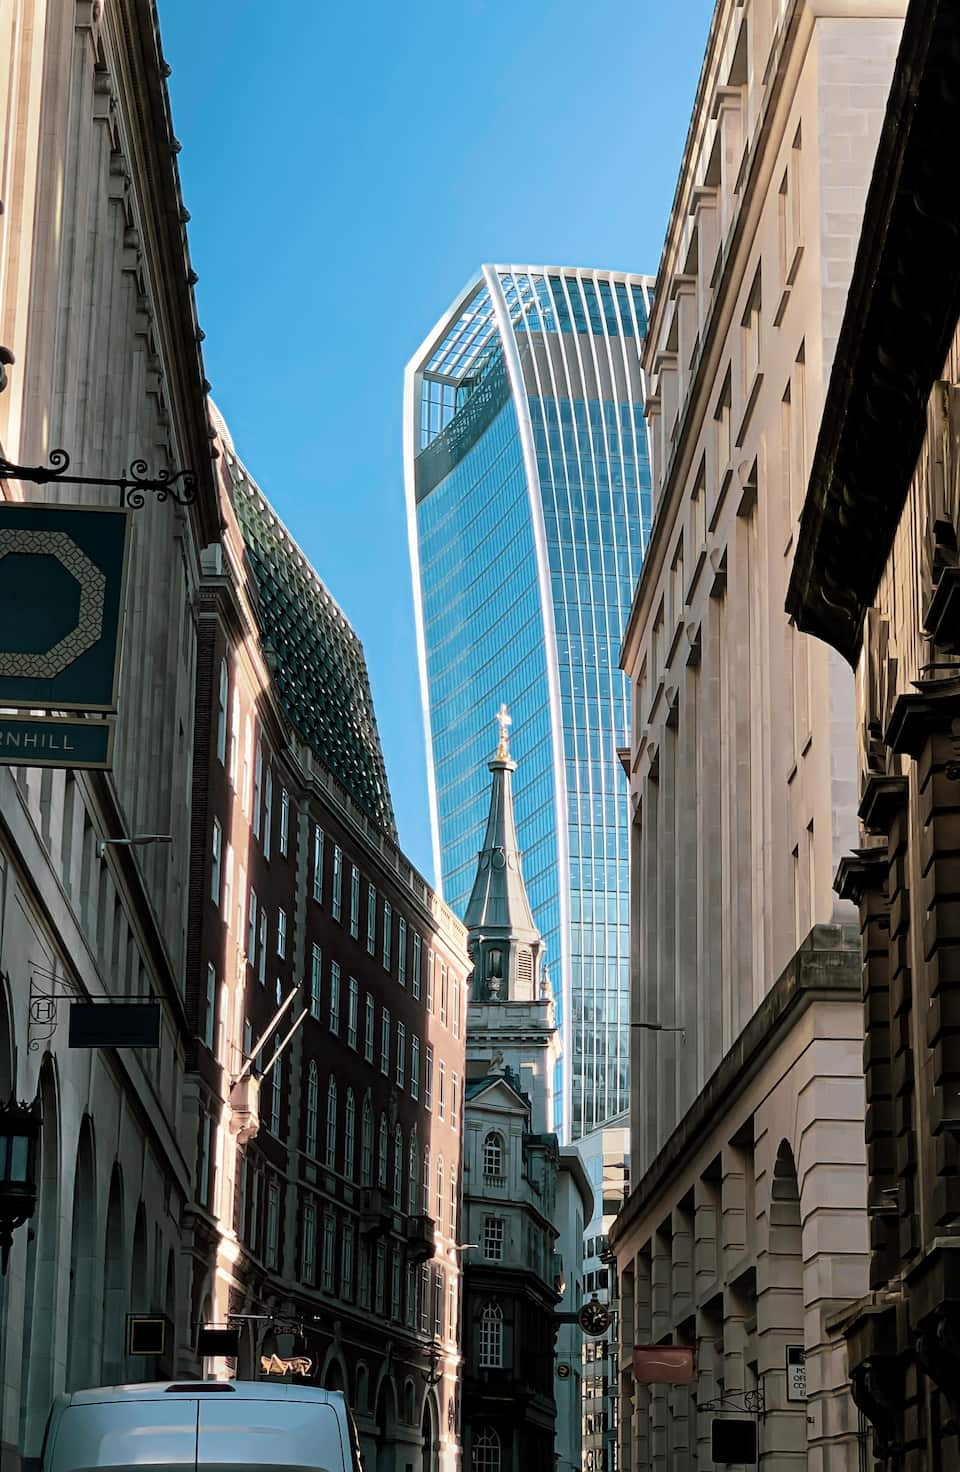 Street in the city of London